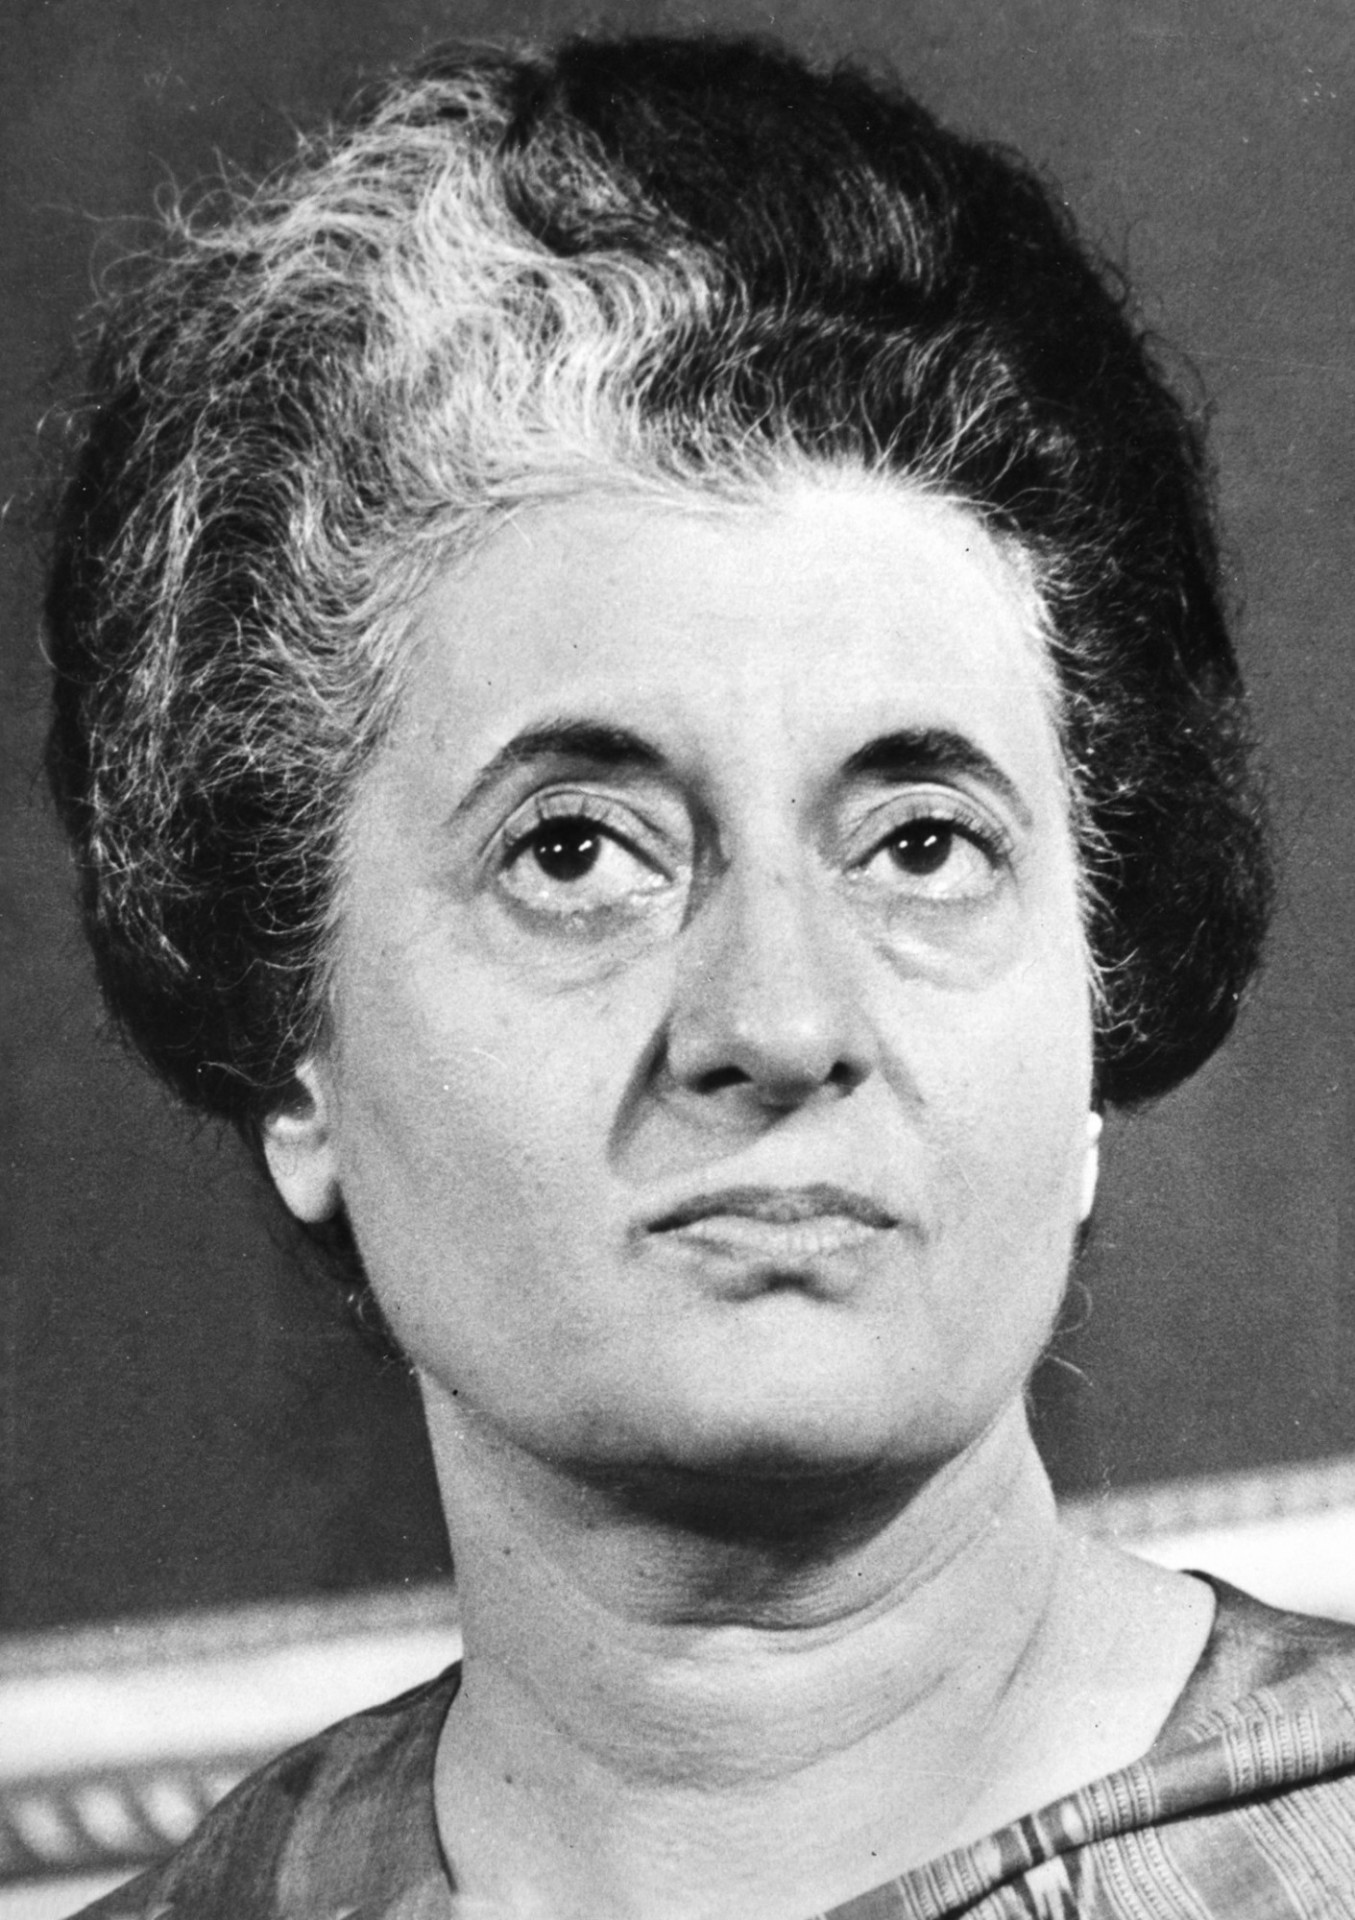 Indira Gandhi, Prime Minister of India during the Emergency (1975–77). Source: Dutch National Archives, via Wikimedia Commons. CC BY-SA 3.0.